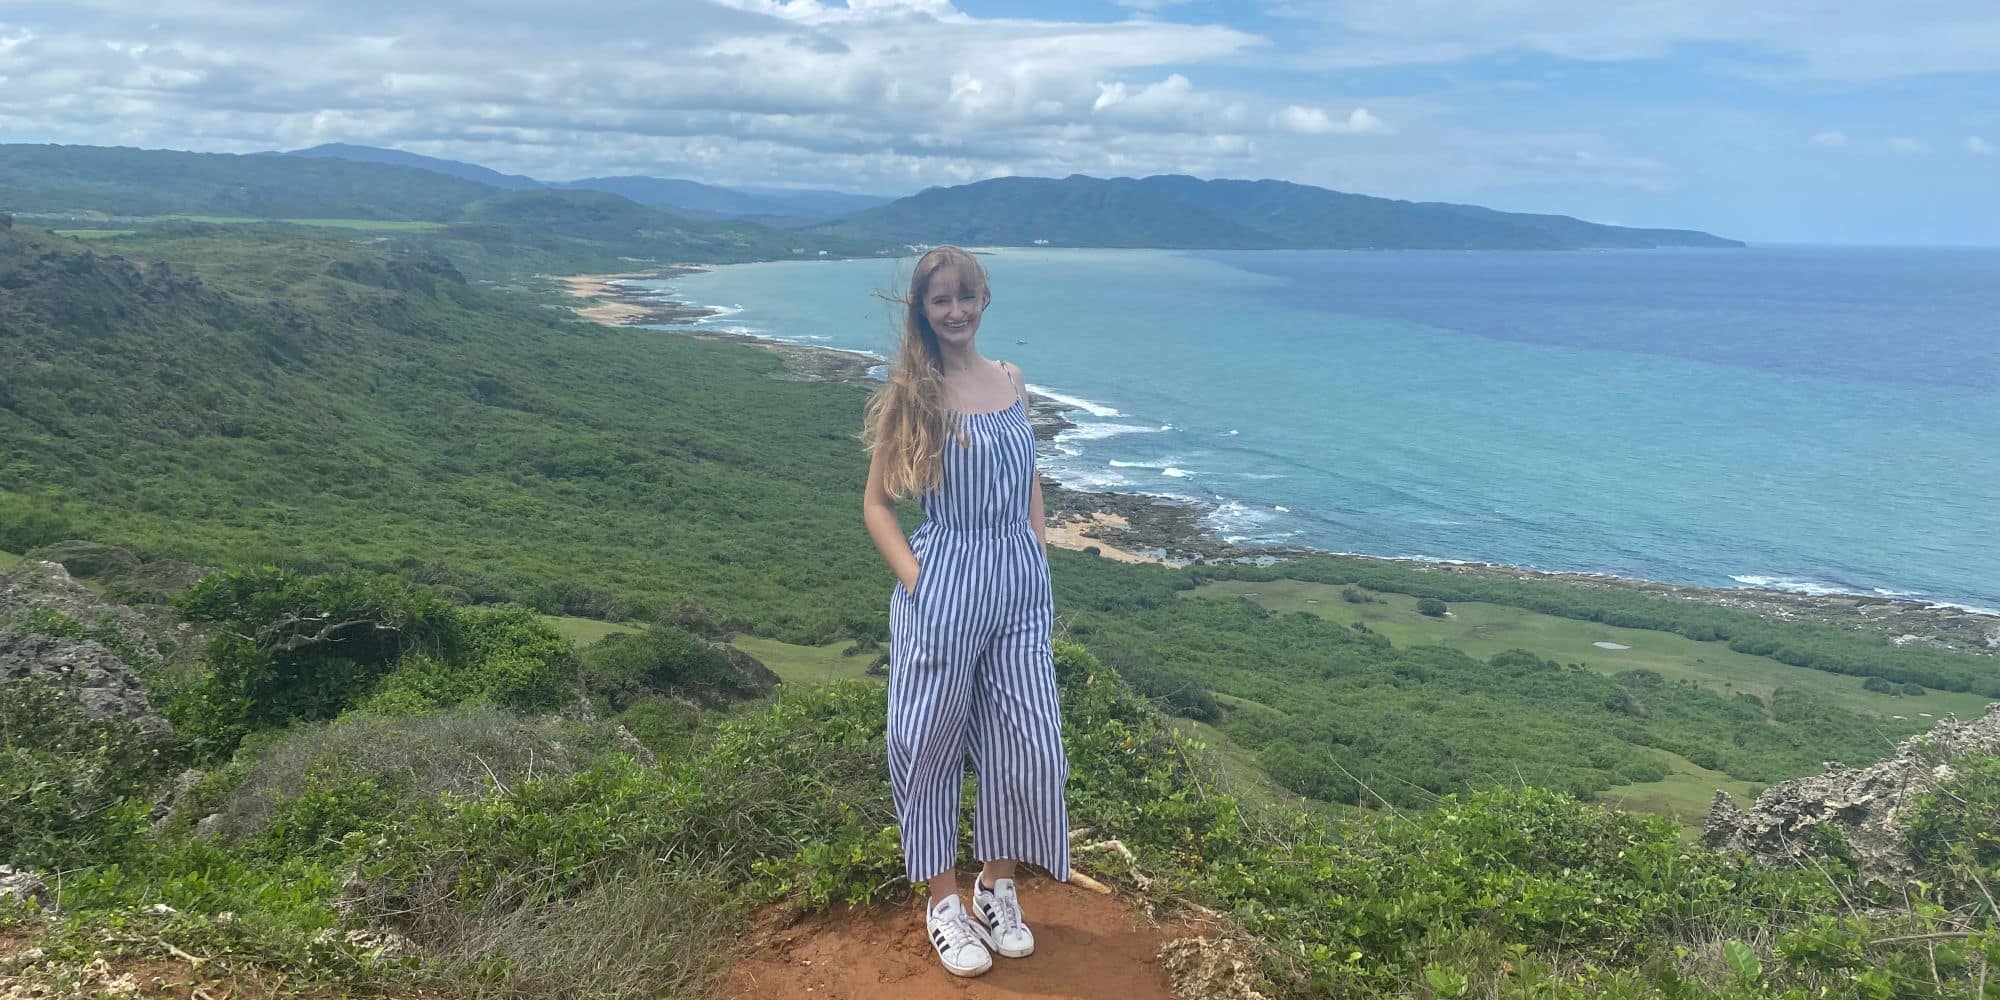 Global Security & Intelligence Studies student Carolyn Chatham (’23) got the opportunity to study abroad over the summer in Kaohsiung, Taiwan.